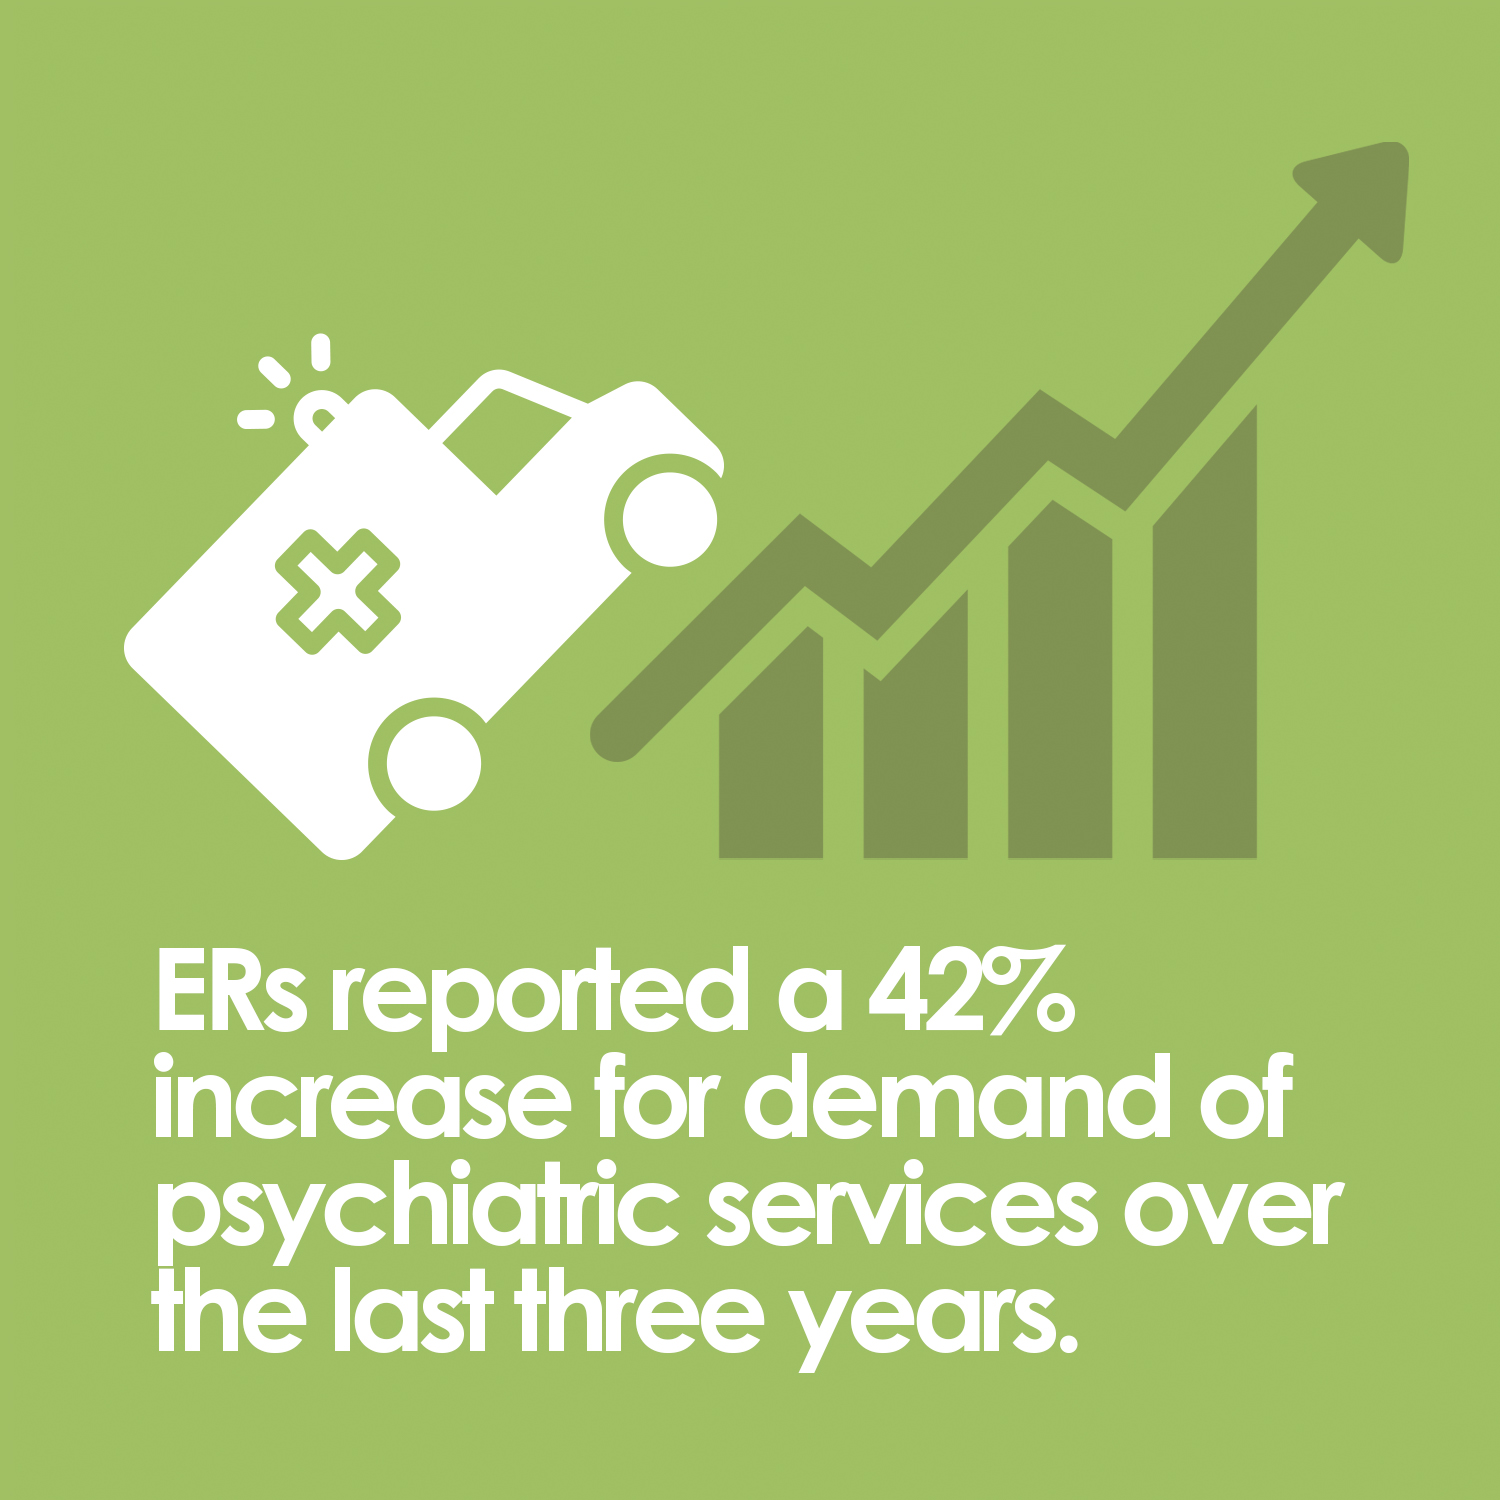 ERs reported a 42% increase for demand of psychiatric services over the last 3 years